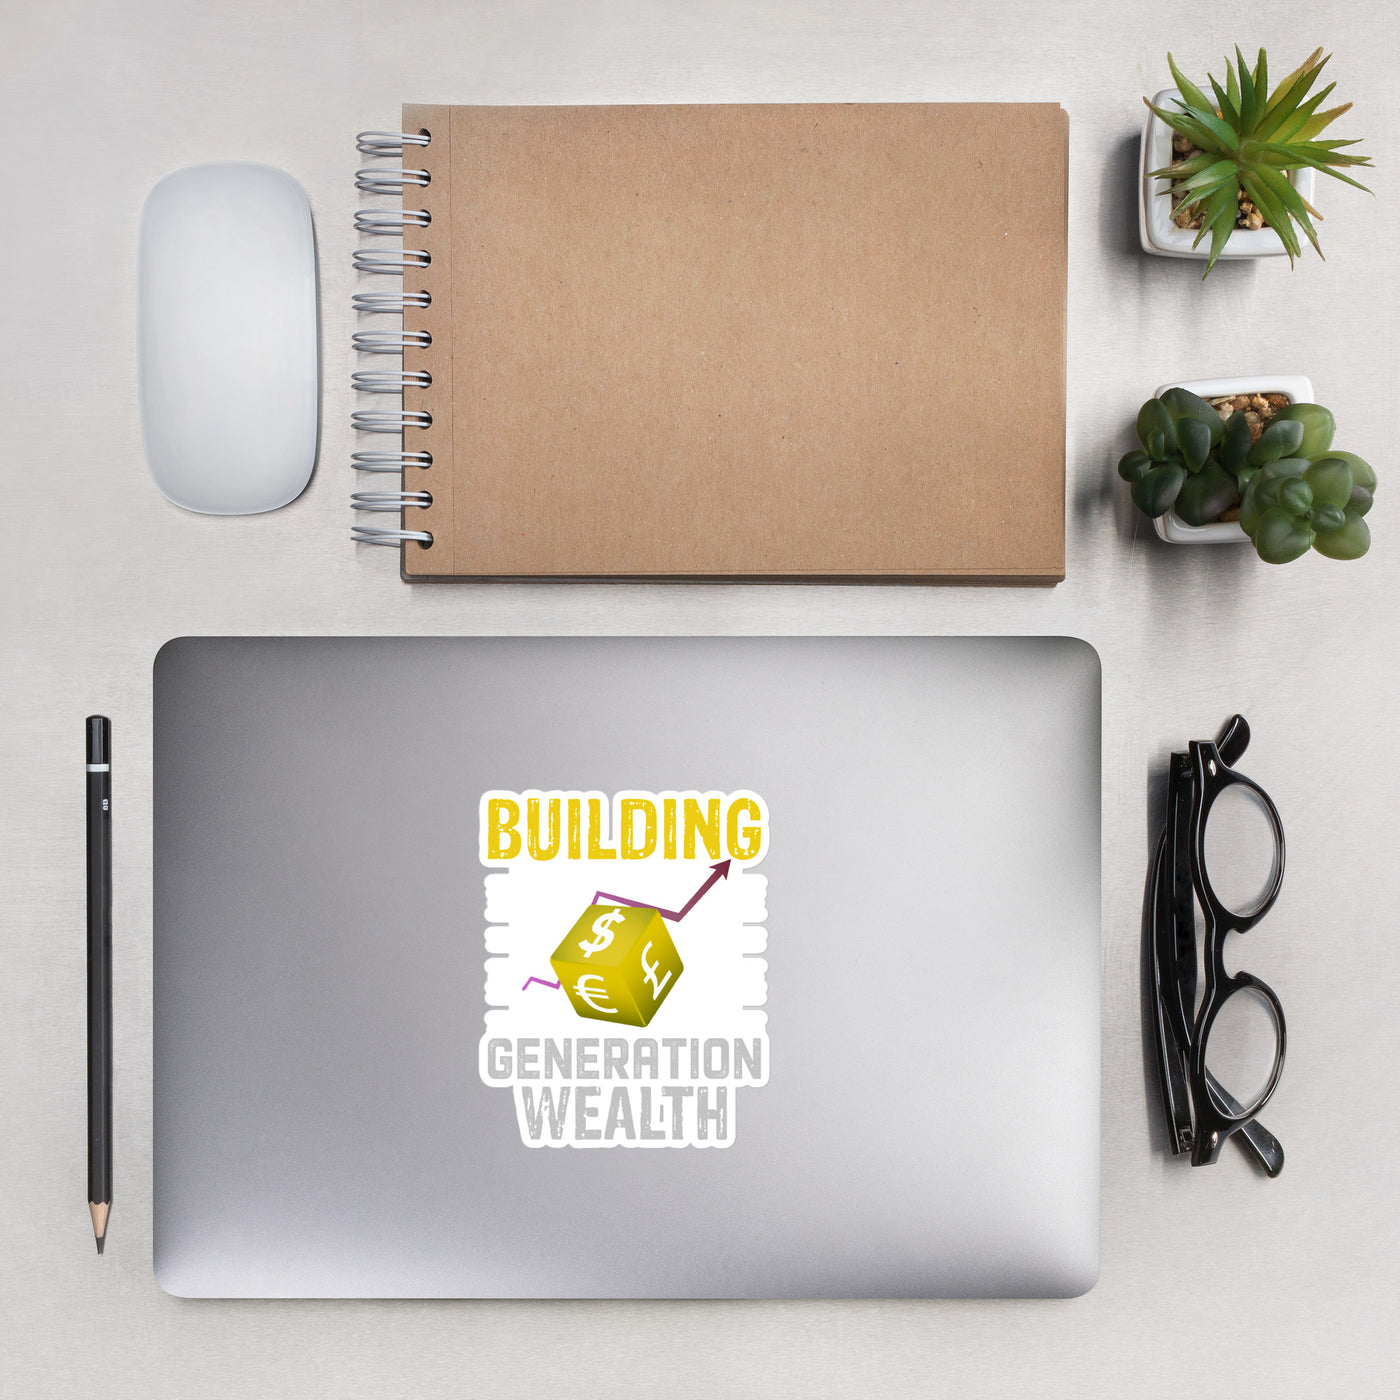 Building Generation Wealth - Bubble-free stickers